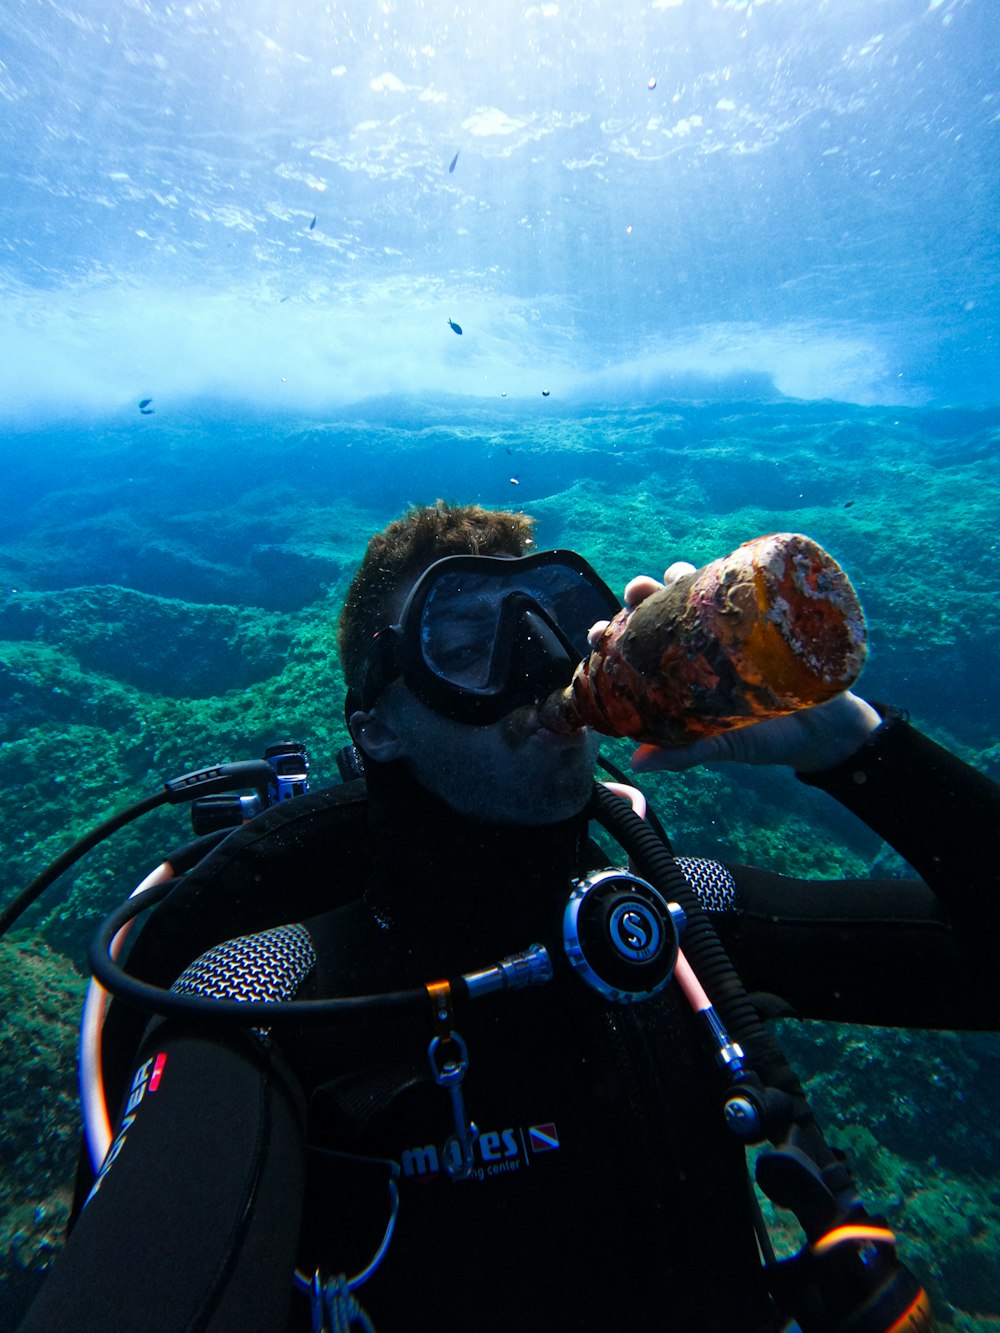 a man in a scuba suit is holding a bottle in the water